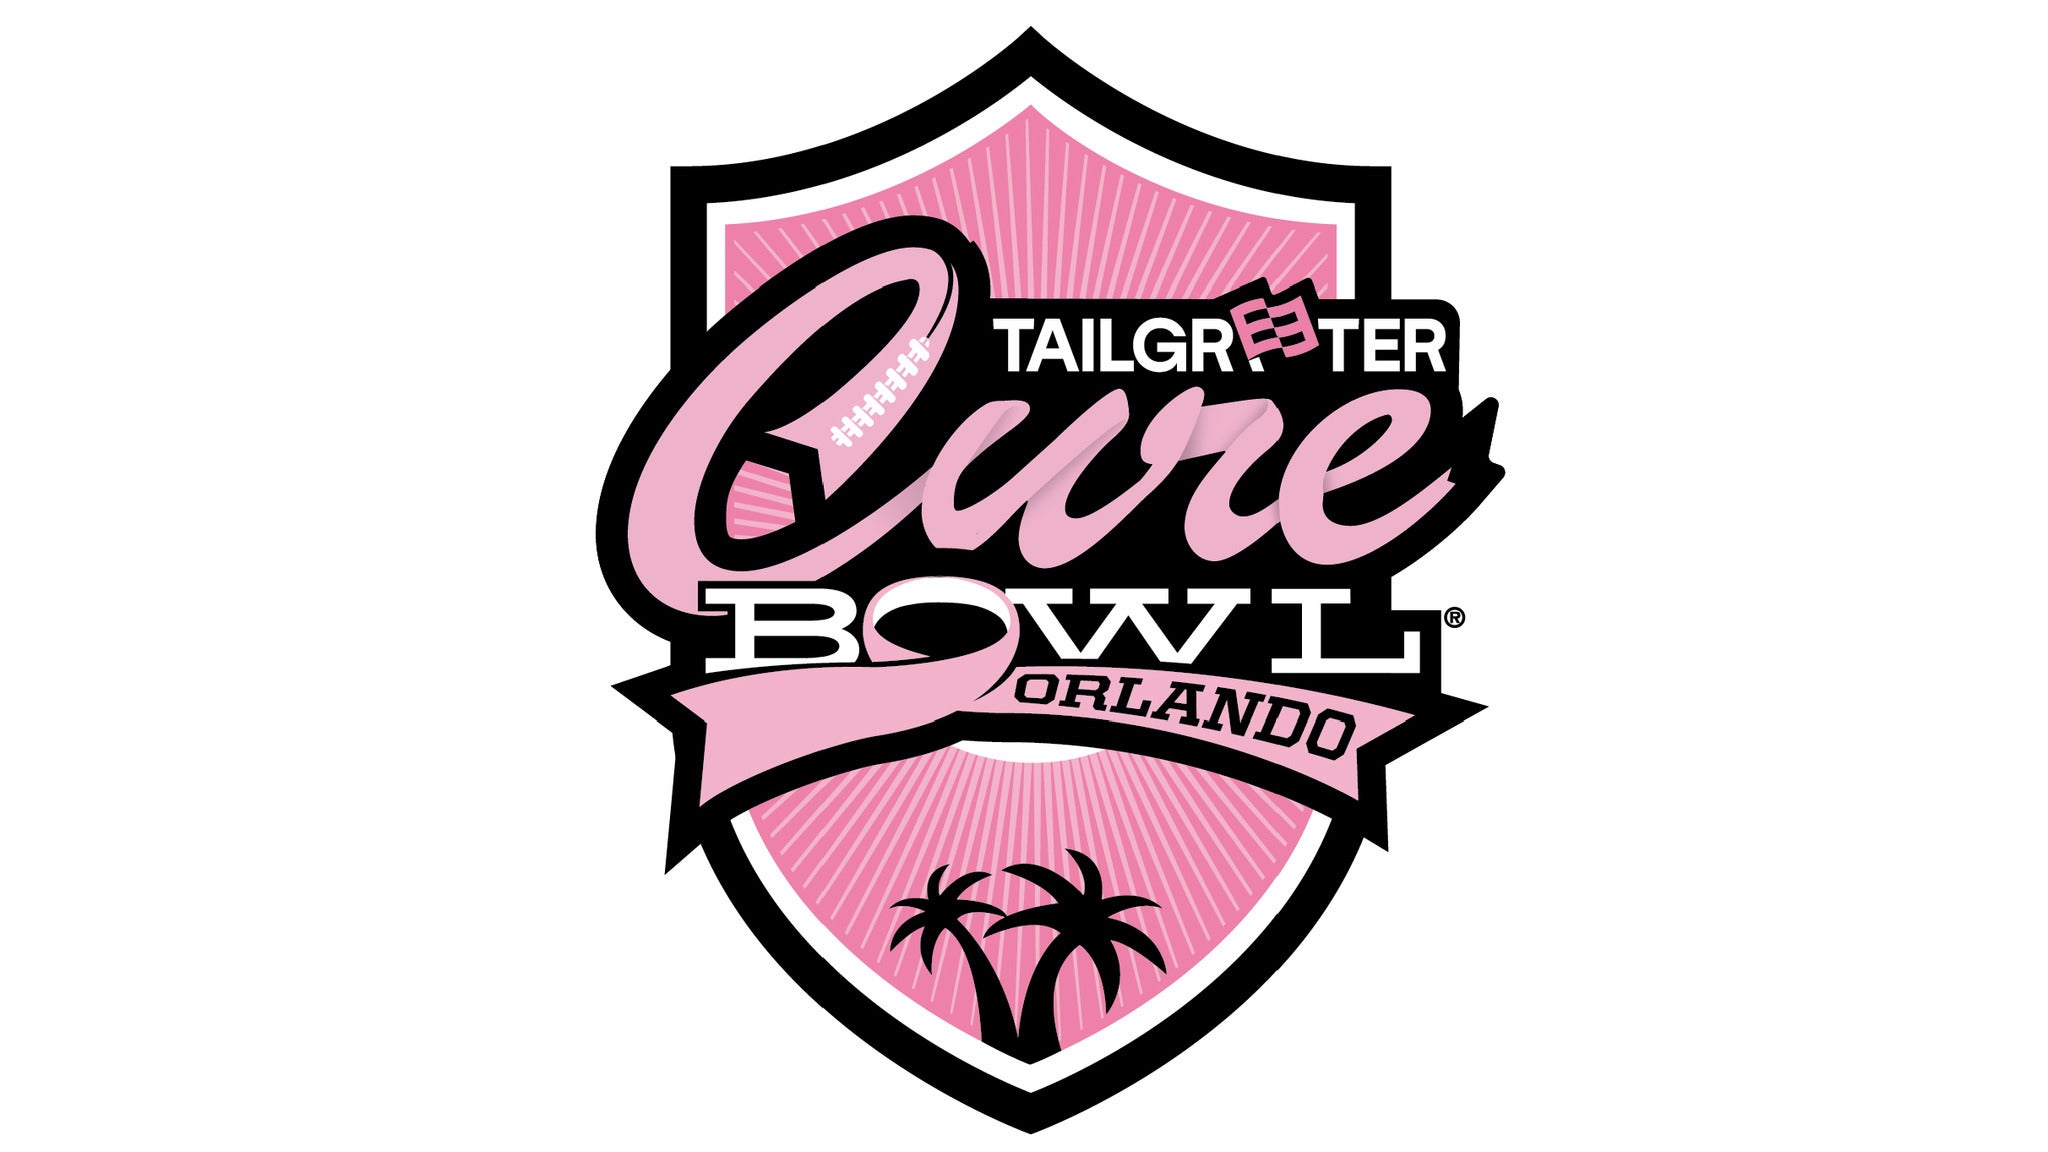 Tailgreeter Cure Bowl in Orlando promo photo for Exclusive presale offer code